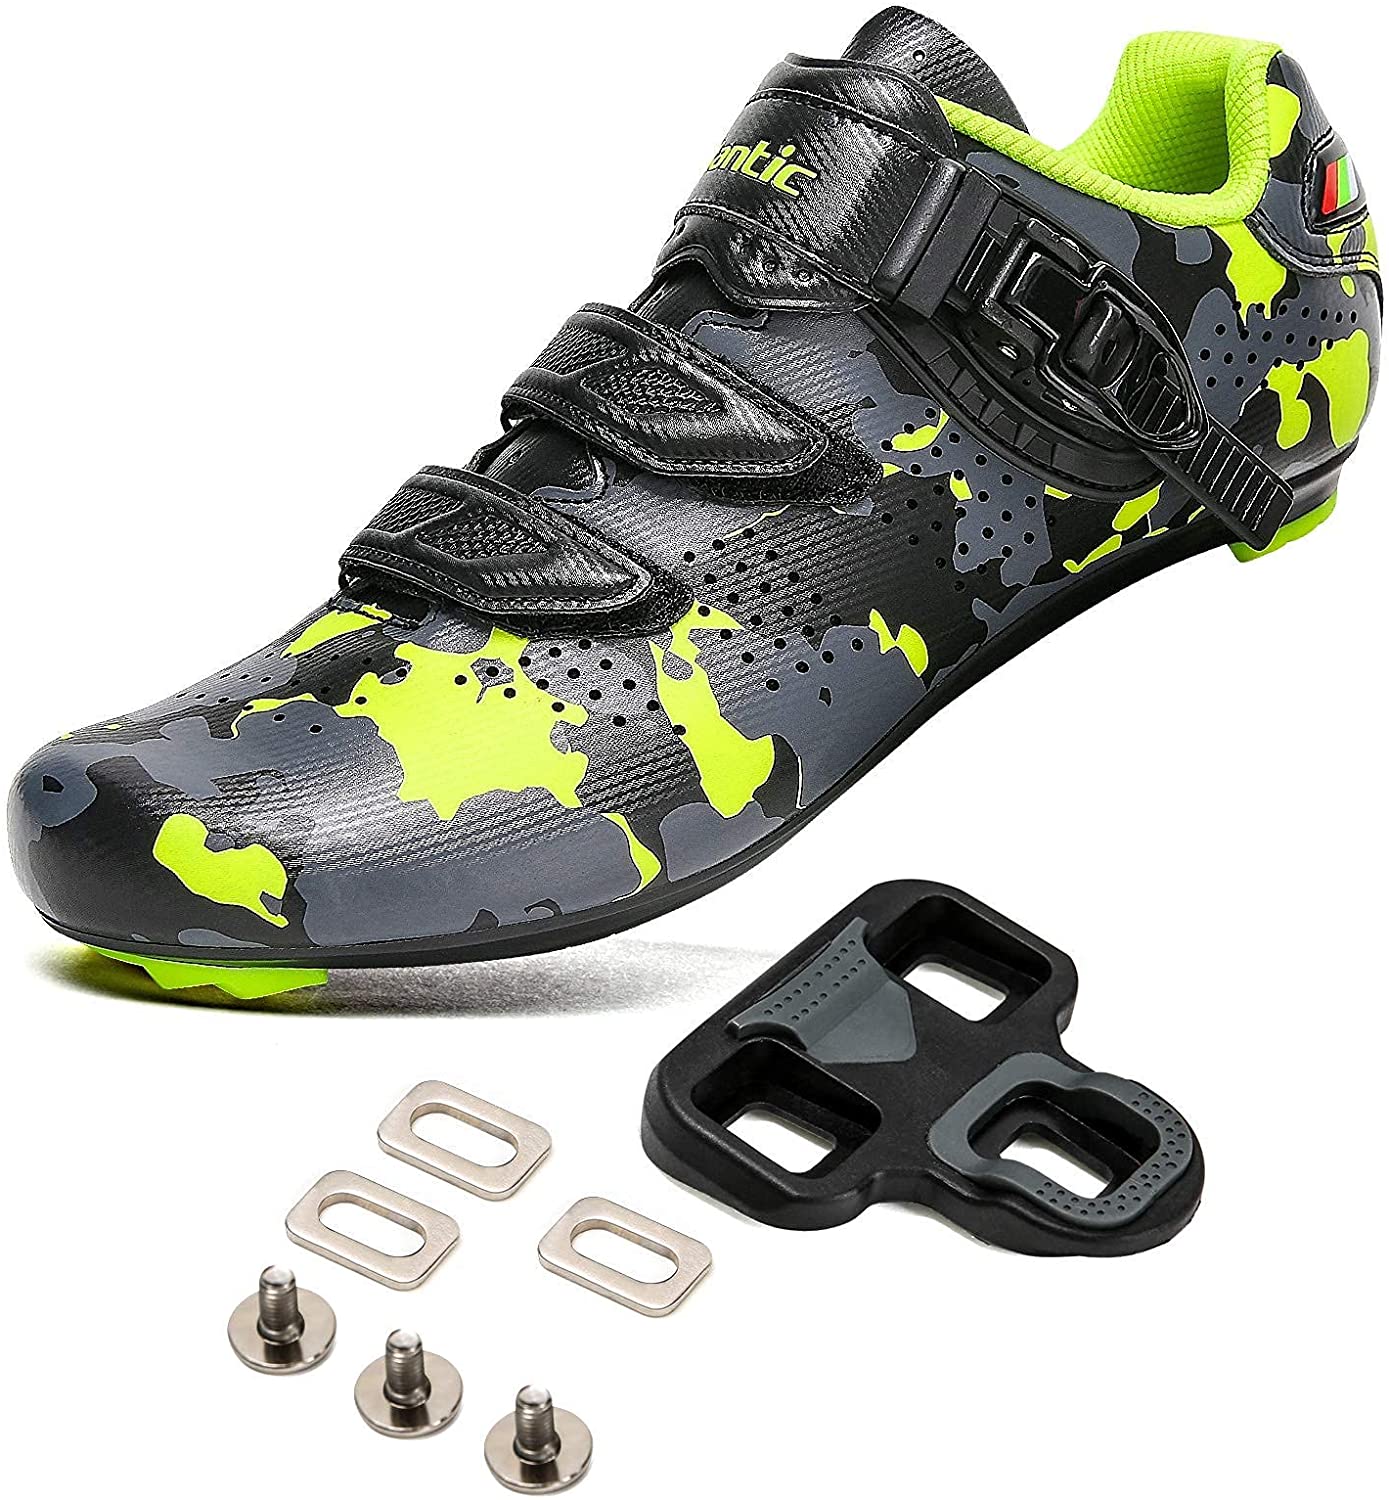 Santic Cycling Shoes Road Bike Shoes Spining Shoes with Buckle